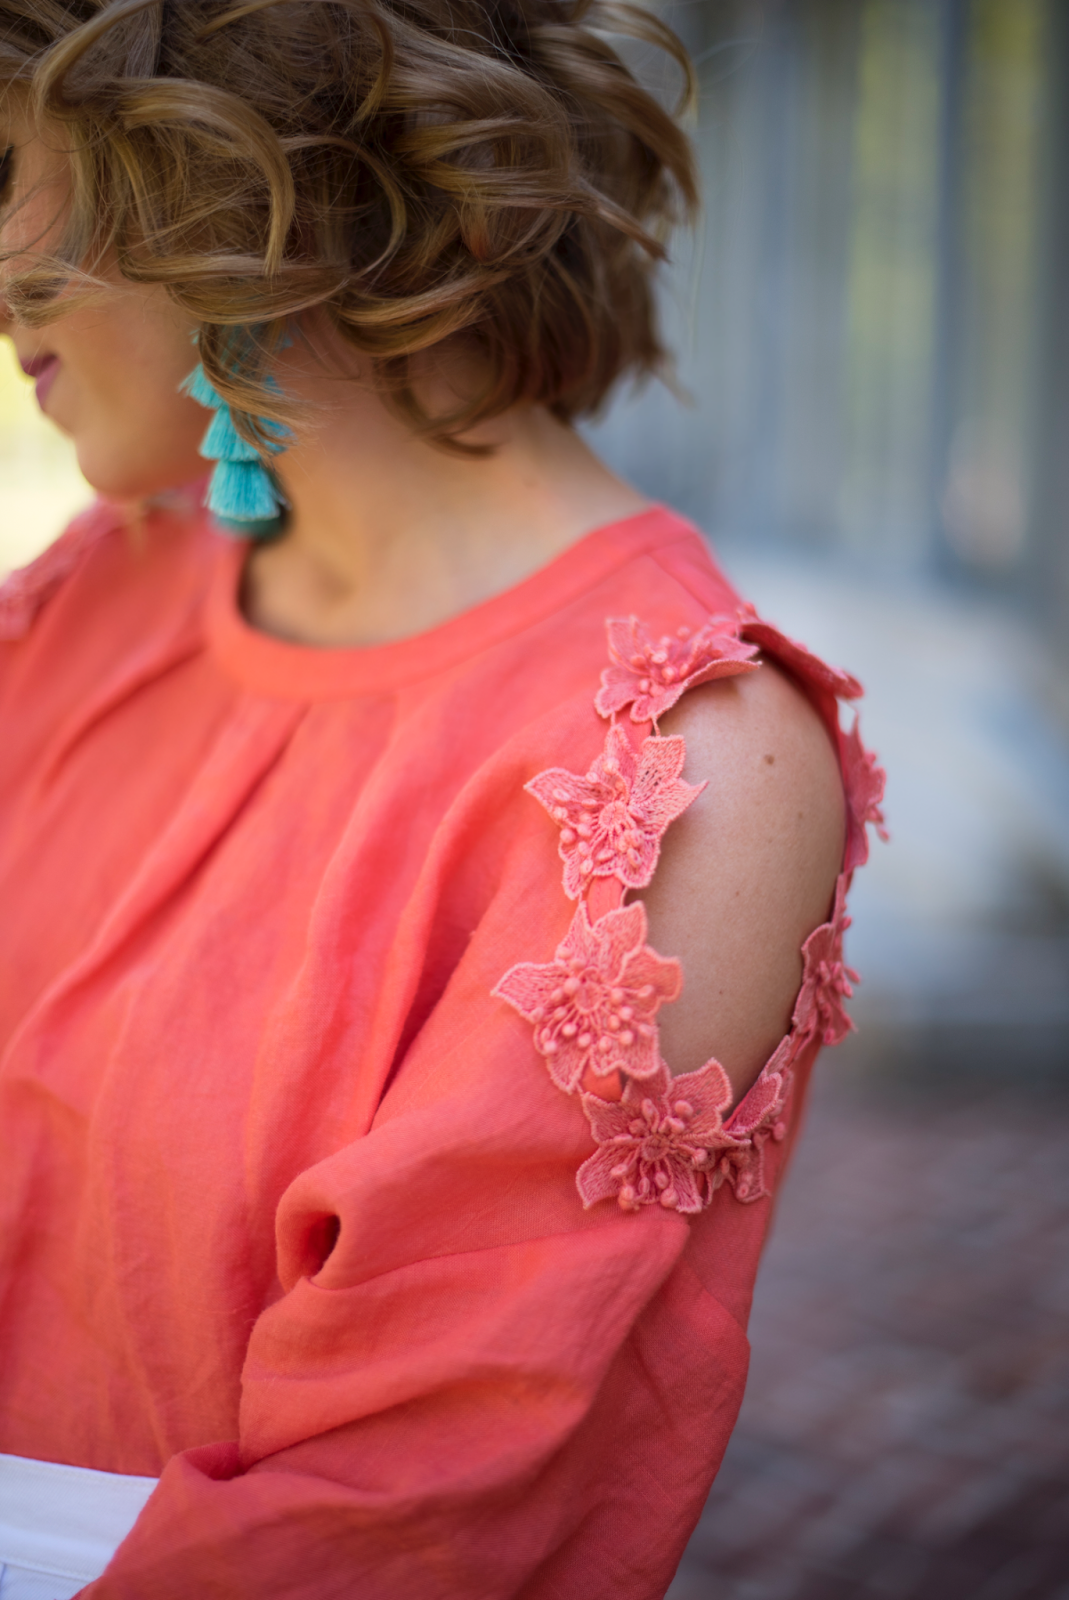 Anthropologie Floral Texture Blouse - Click through to see more on Something Delightful.